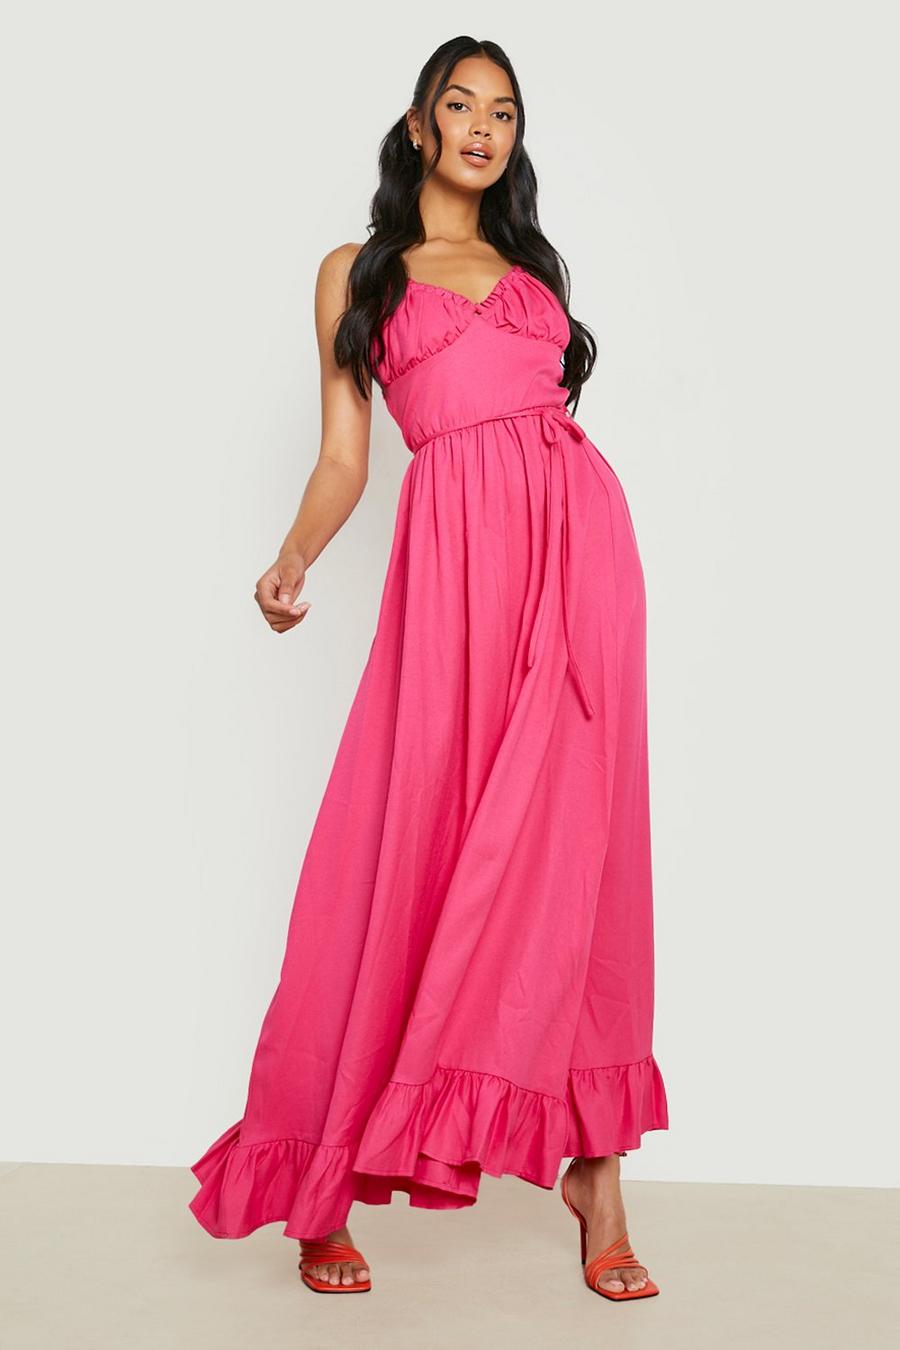 Hot pink rose Ruched Bust Maxi Cami Dress